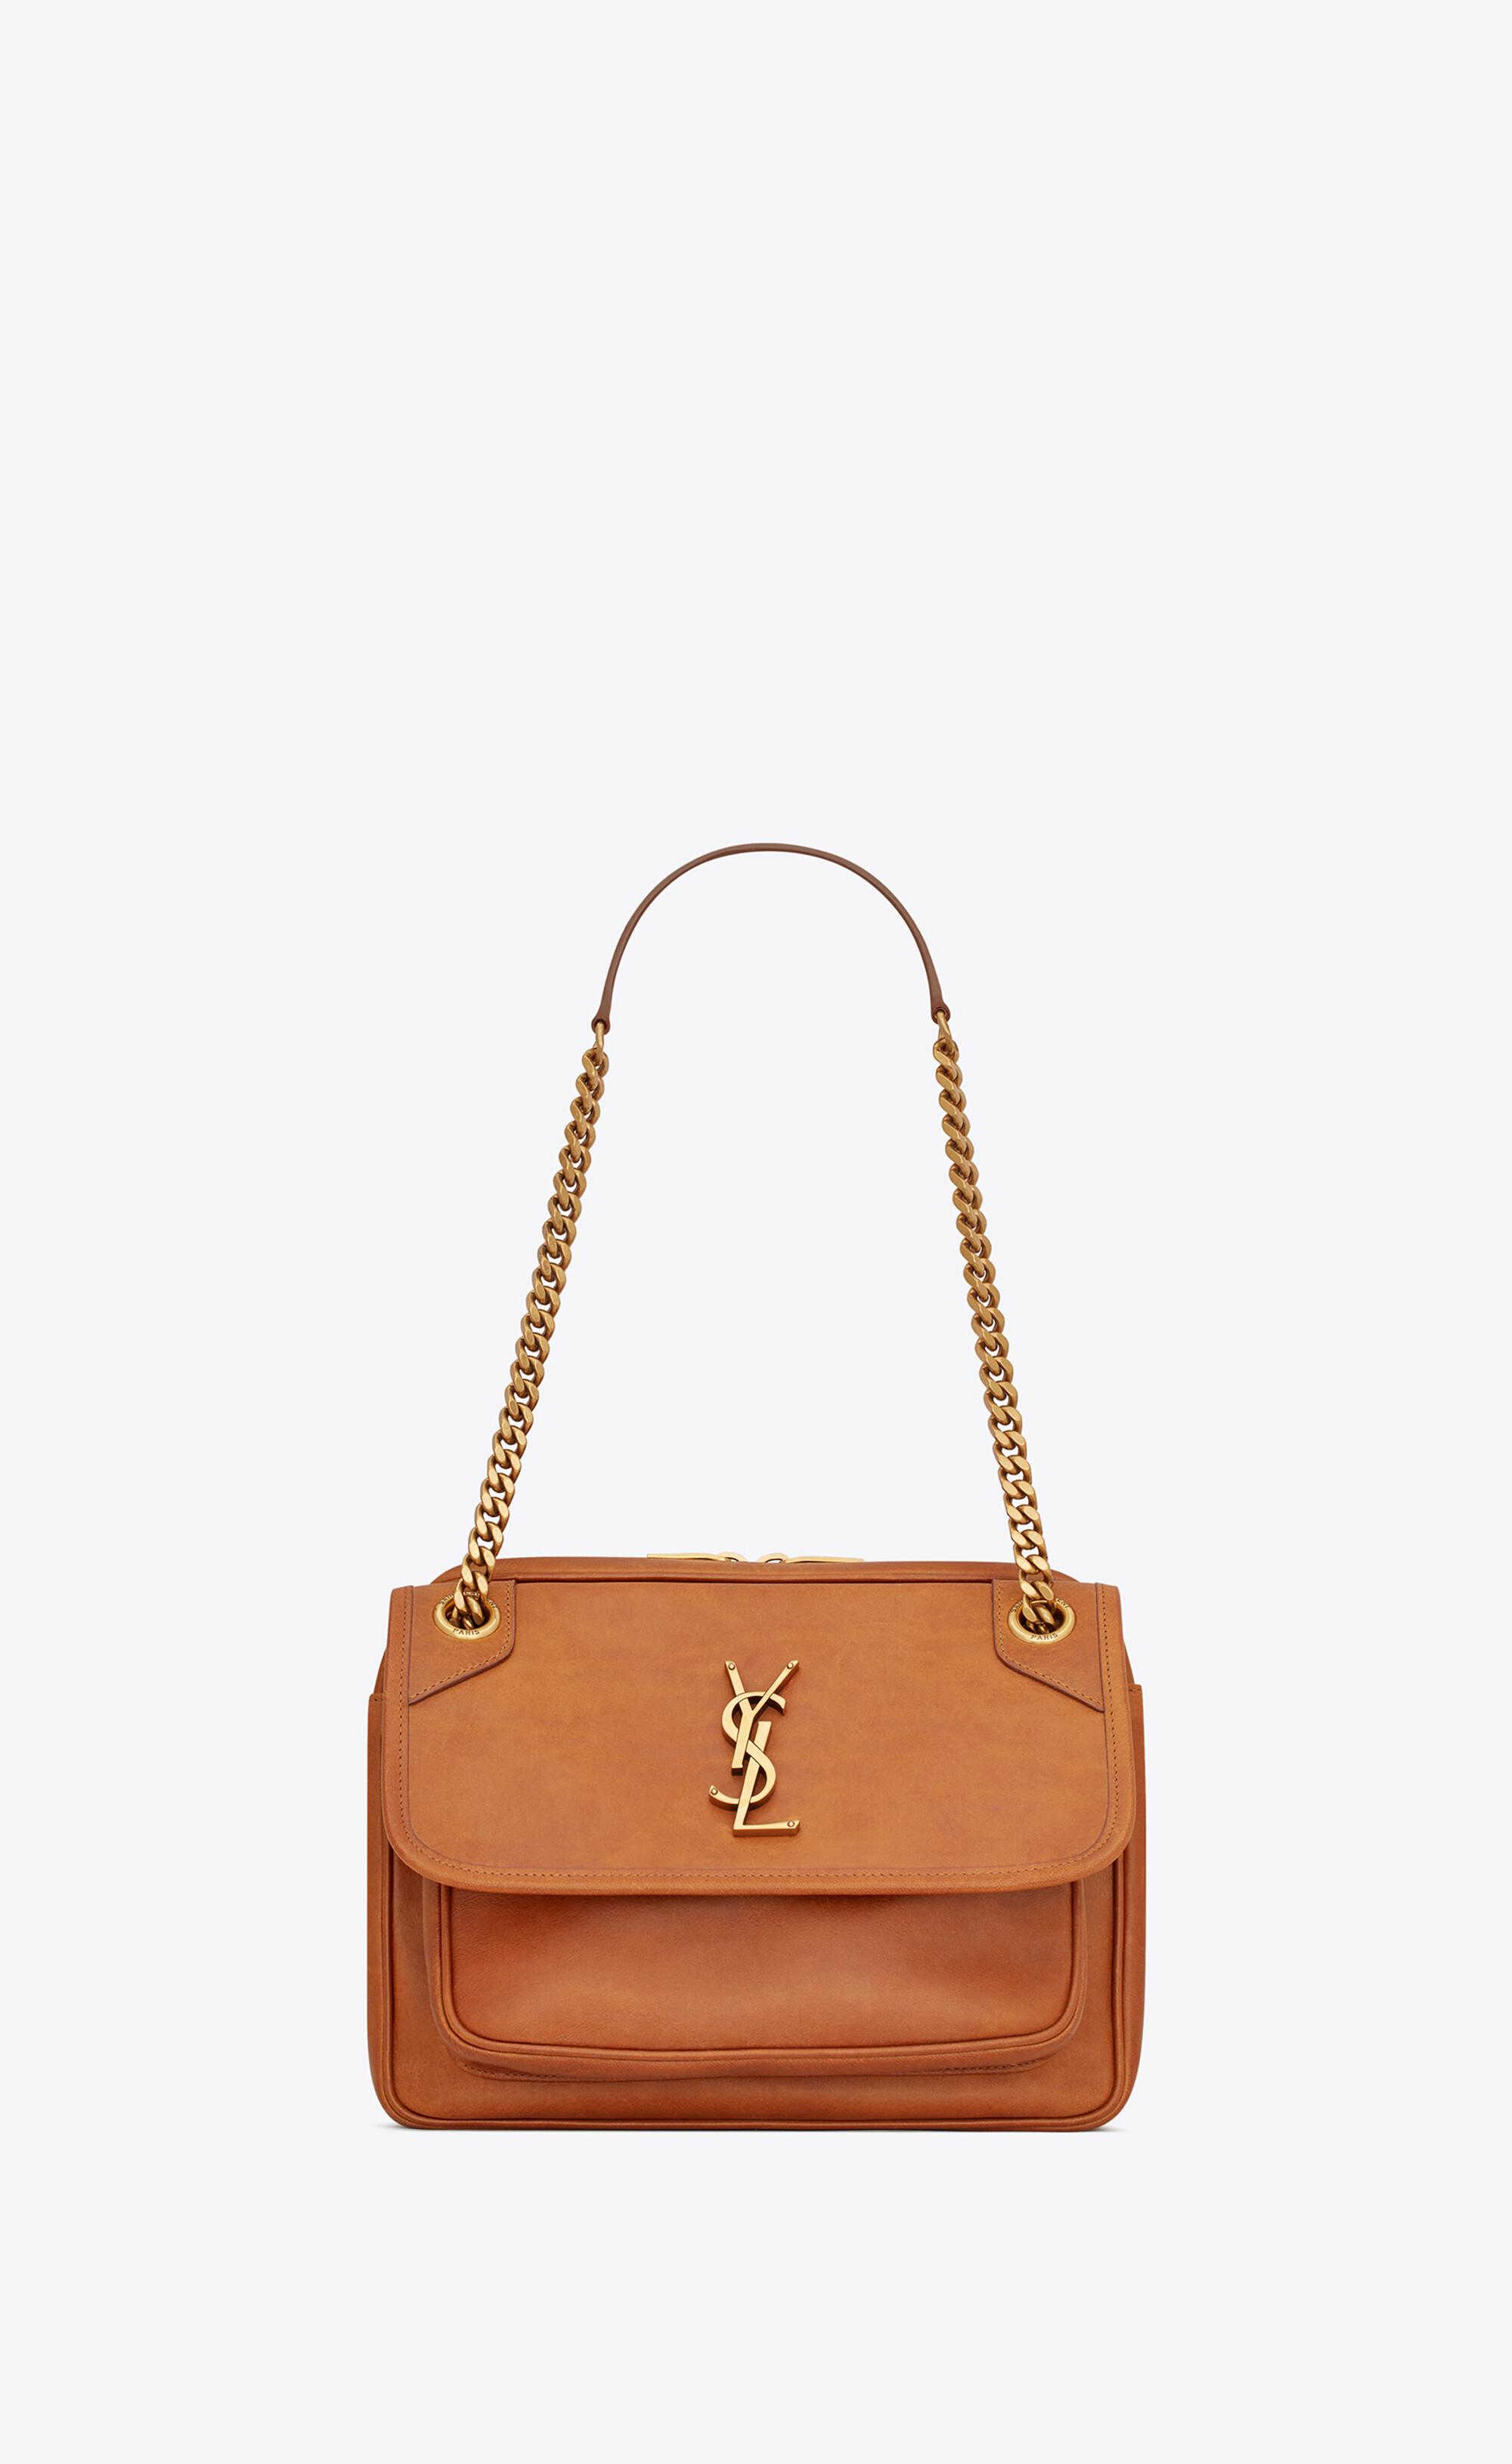 Saint Laurent YSL Women Monogramme Coeur Bag in Canvas and Vintage Leather